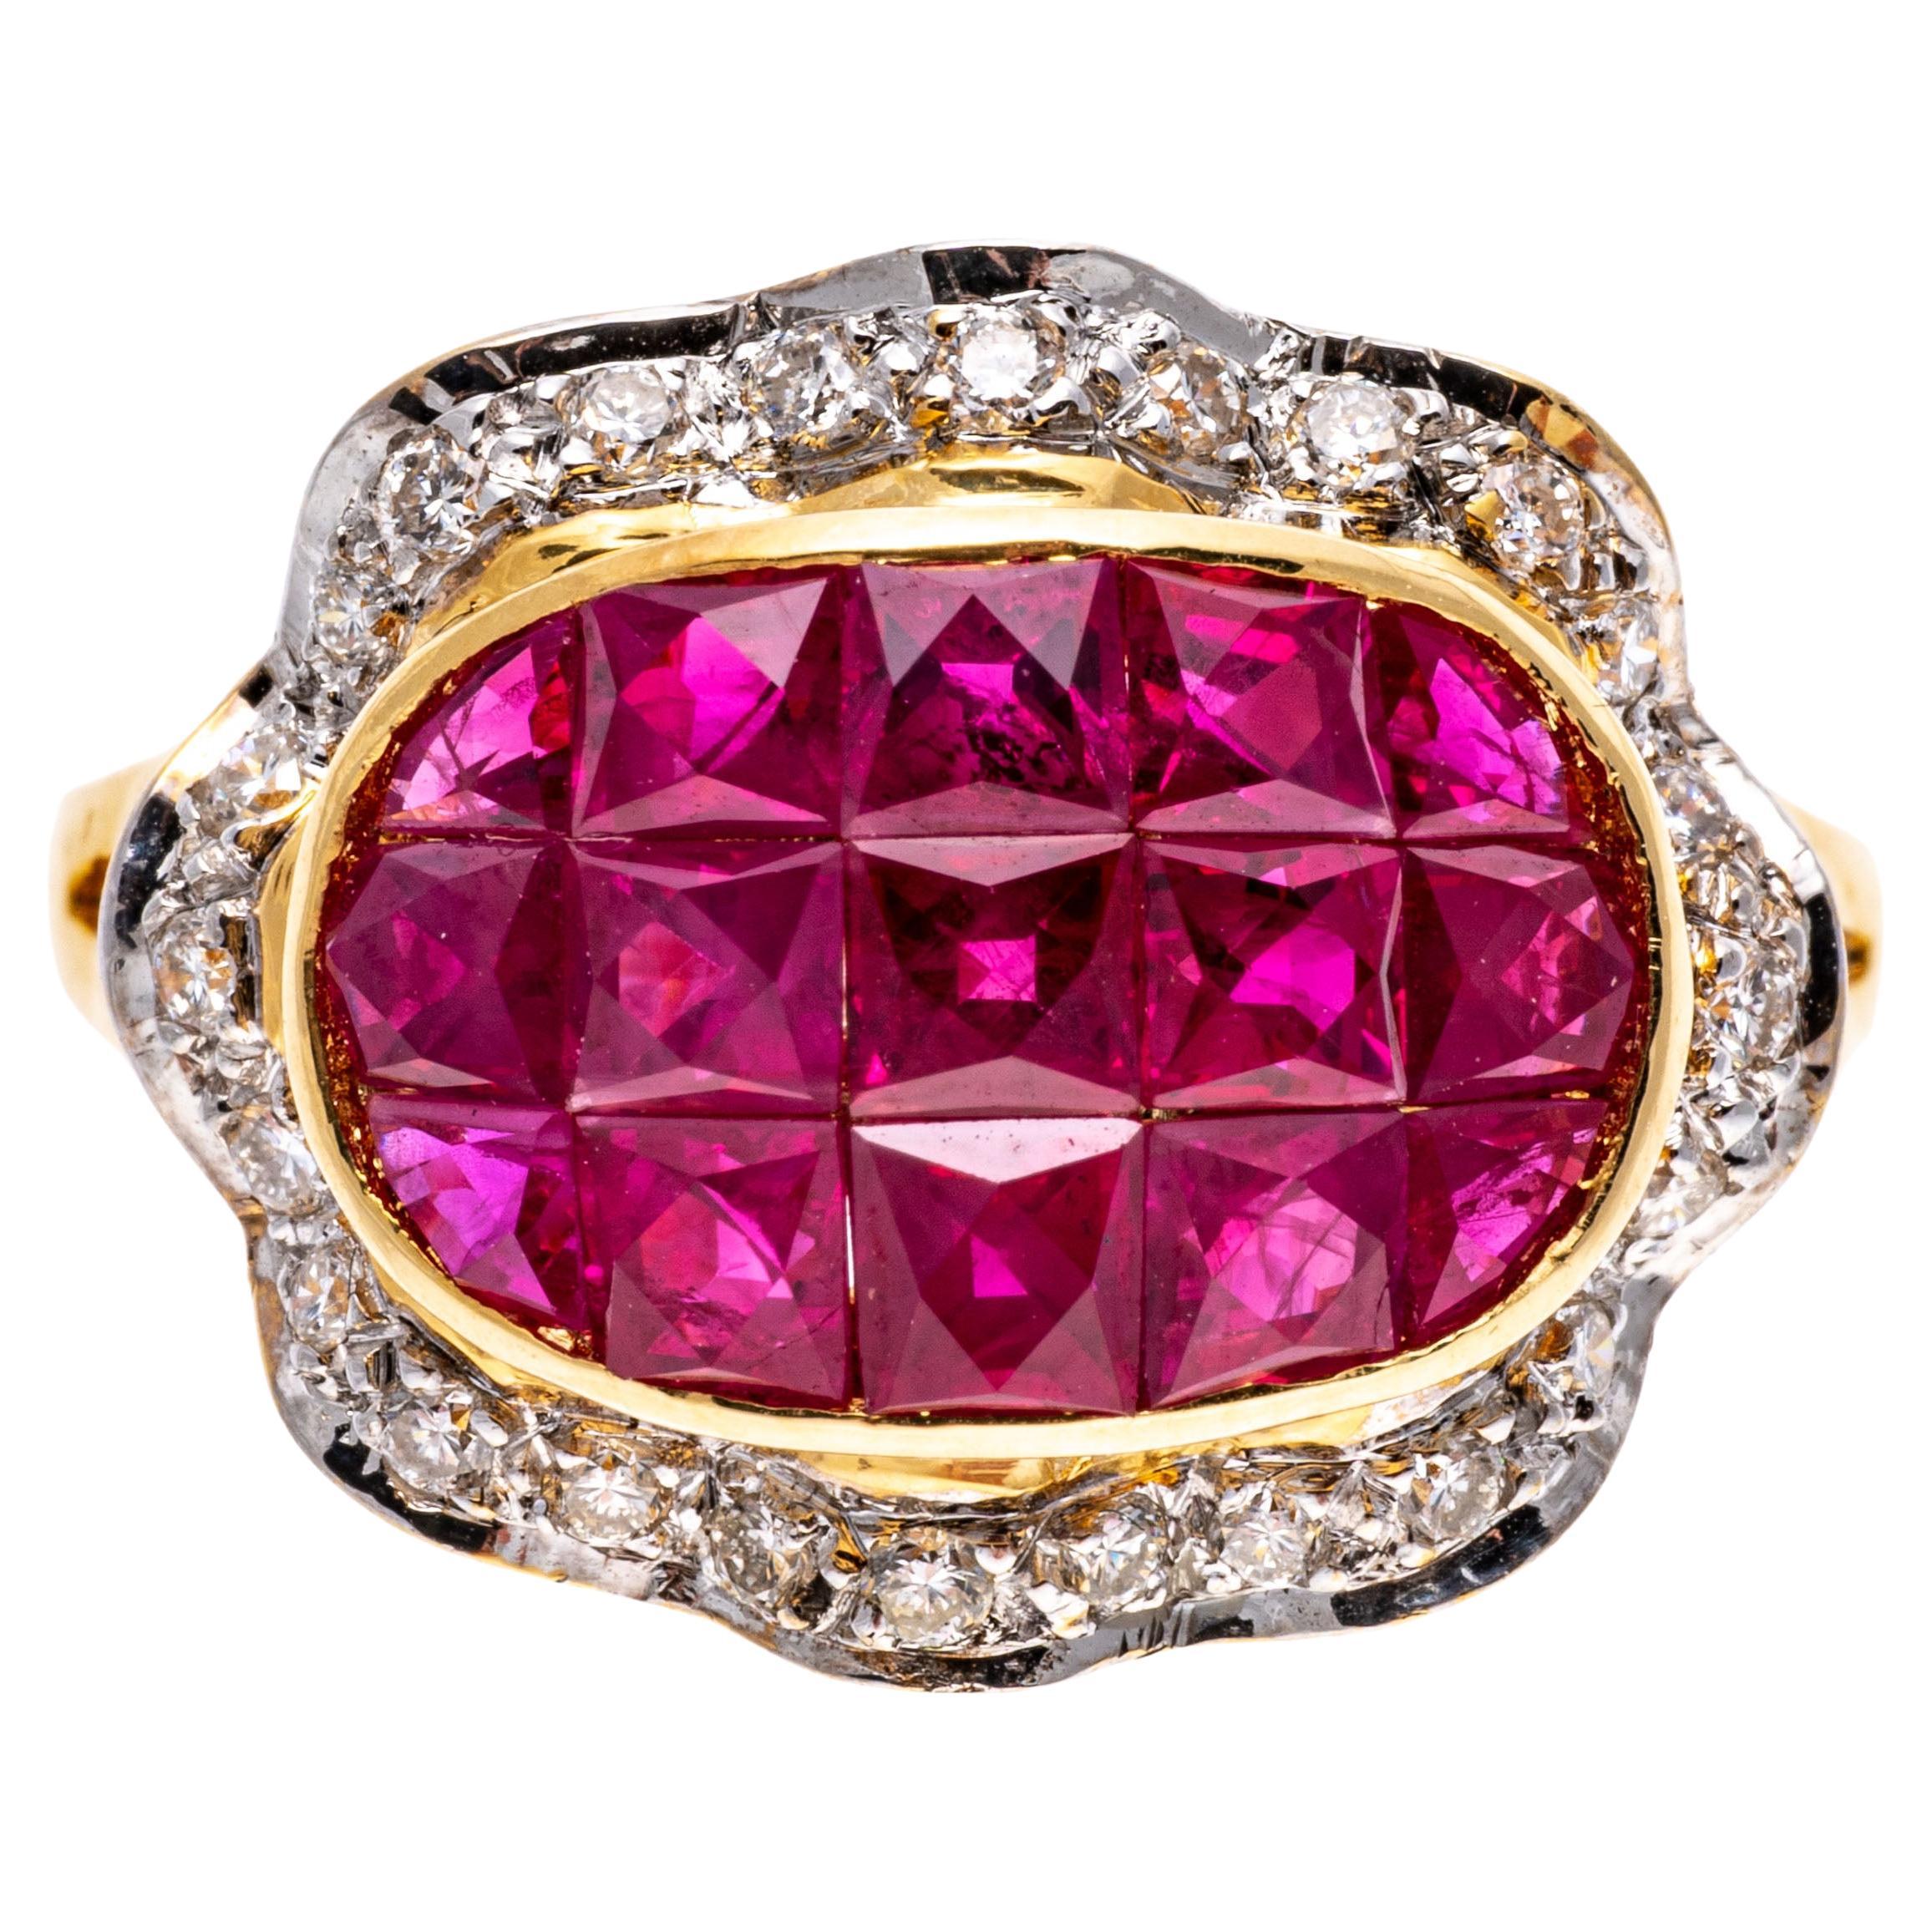 18k Yellow Gold Calibre Cut Ruby Ring With Ruffled Diamond Border, Size 7 For Sale